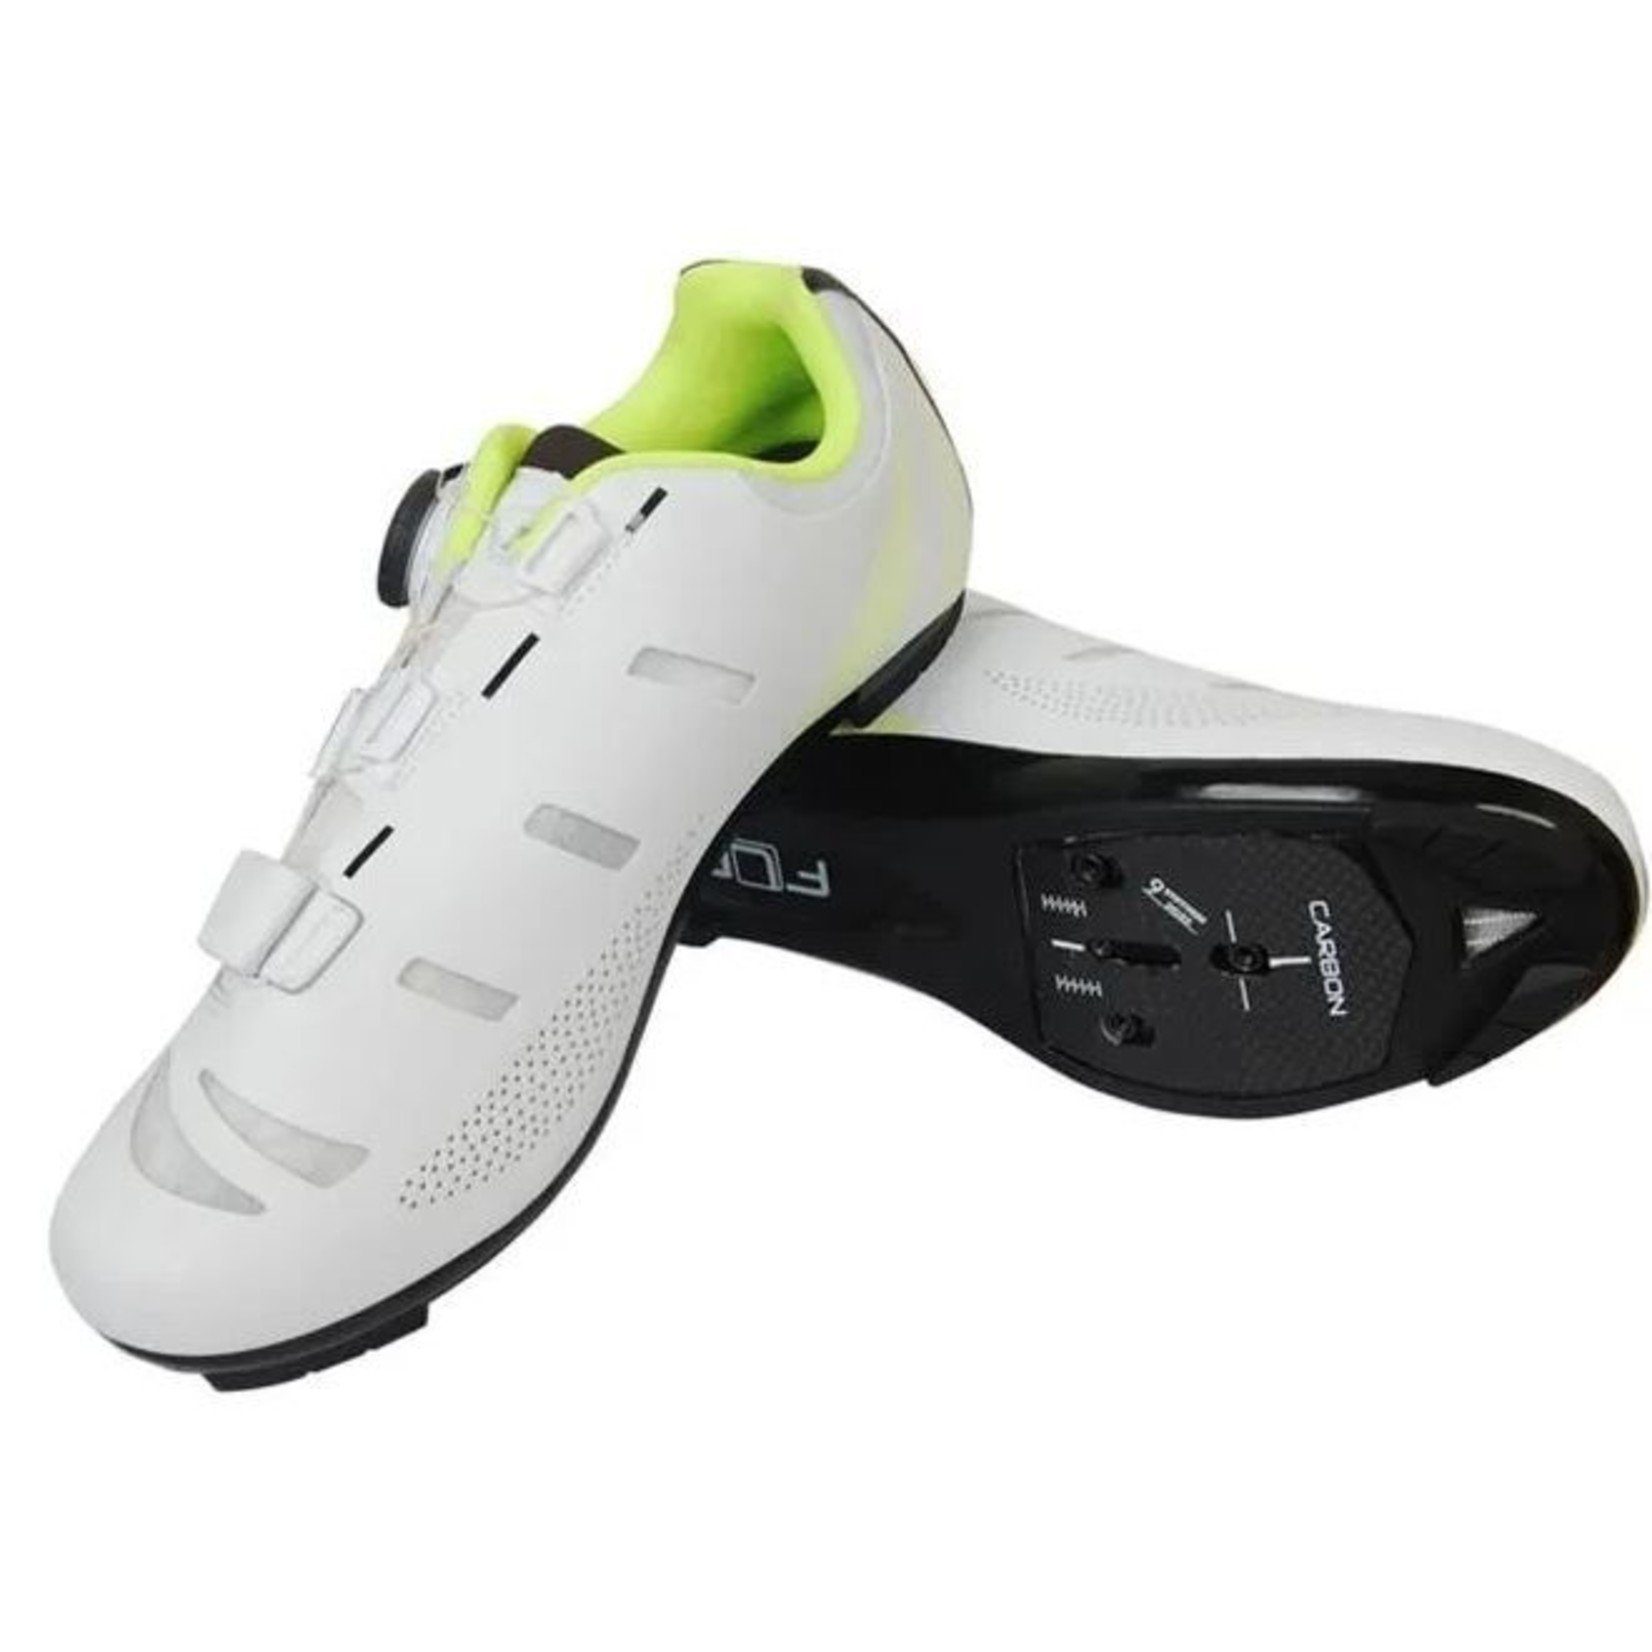 FLR FLR F-22-II - Pro Road Shoes - R350 Carbon Plate - Size 43 - White - Yellow